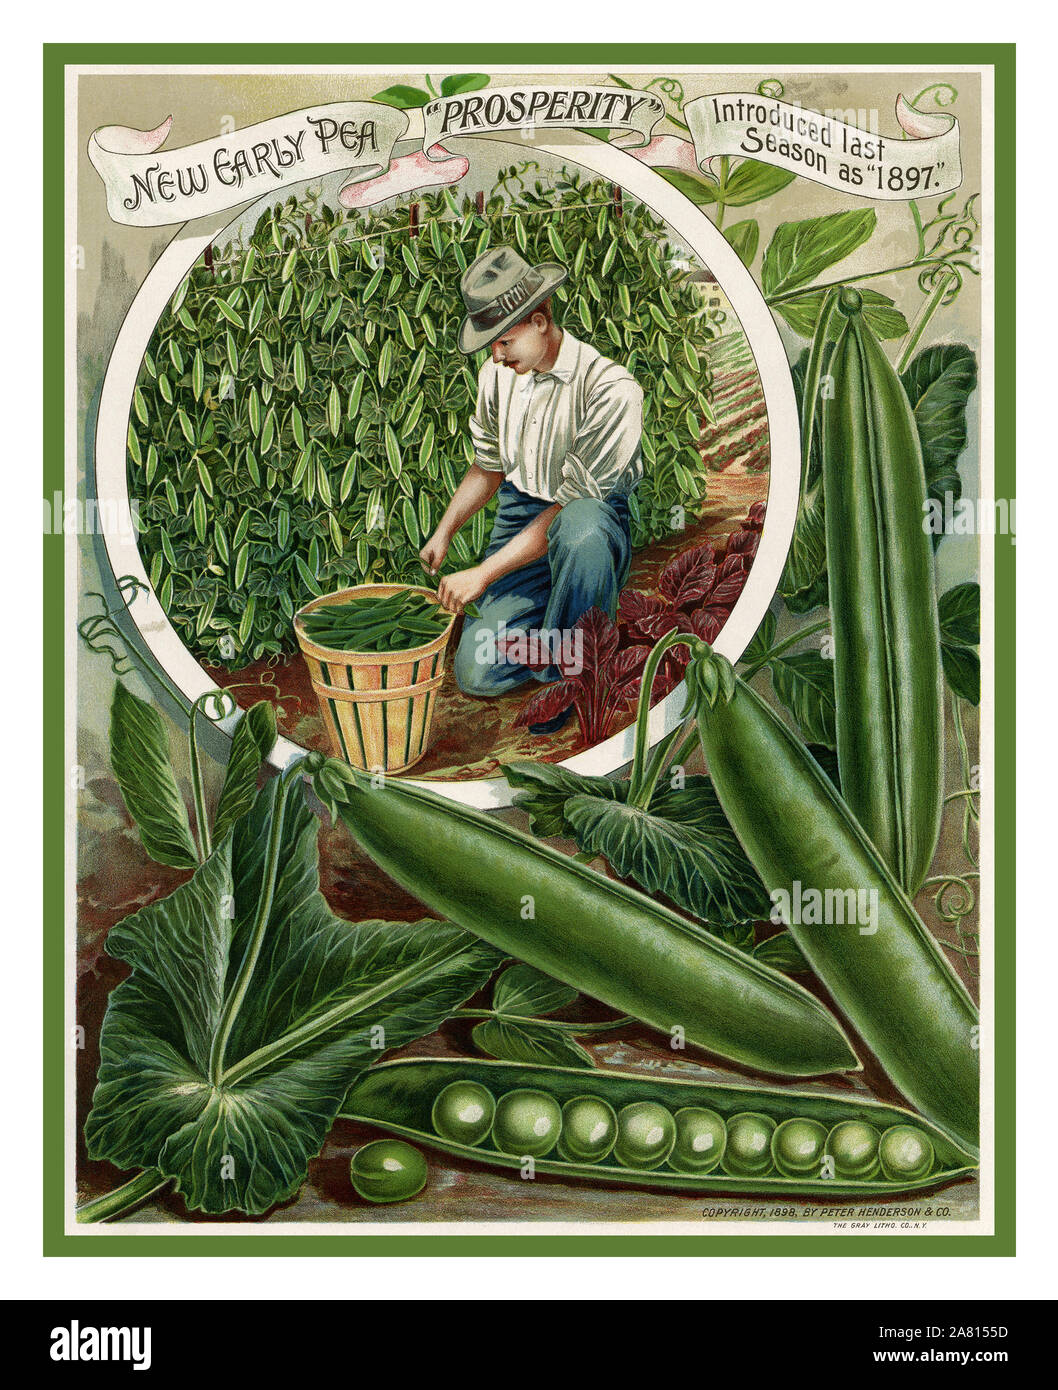 Vintage USA food advertisement for Henderson’s New Early Pea “Prosperity” includes an lithograph illustration of a man picking beautifully ripened garden peas. His wooden basket is full and the vines still hold an abundance of peas. Large illustrations of individual peas are in the foreground of the image. The page is from the Peter Henderson & Co. Everything for the Garden Manual, 1898. Stock Photo